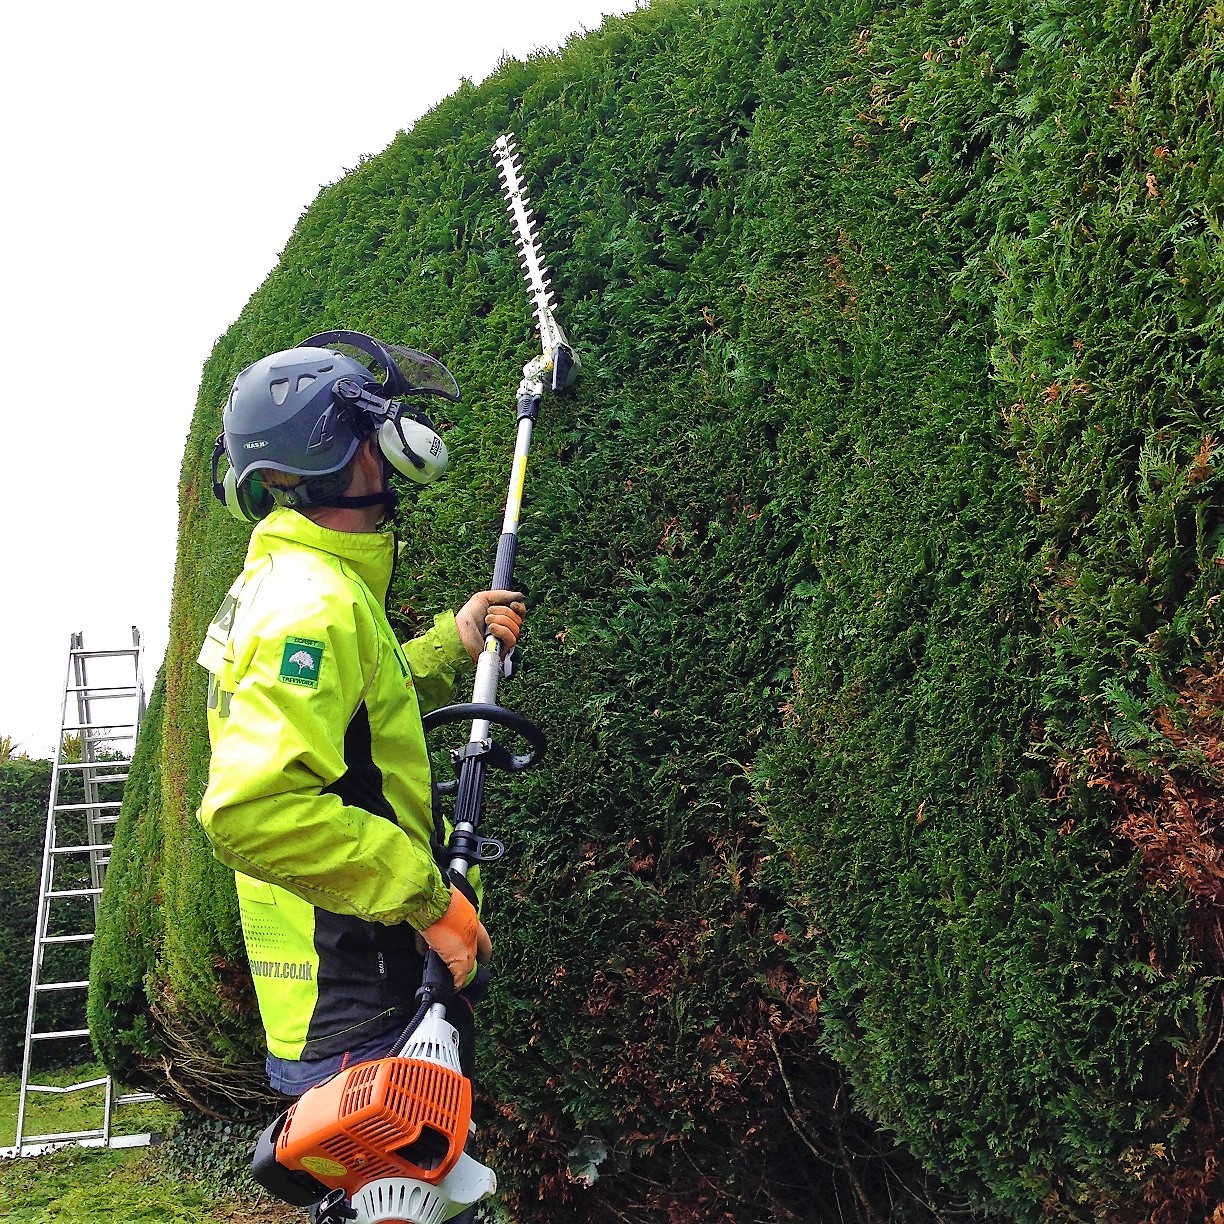 Hedge Trimming, Hedge Cutting in Weymouth, Dorchester, Portland, Dorset